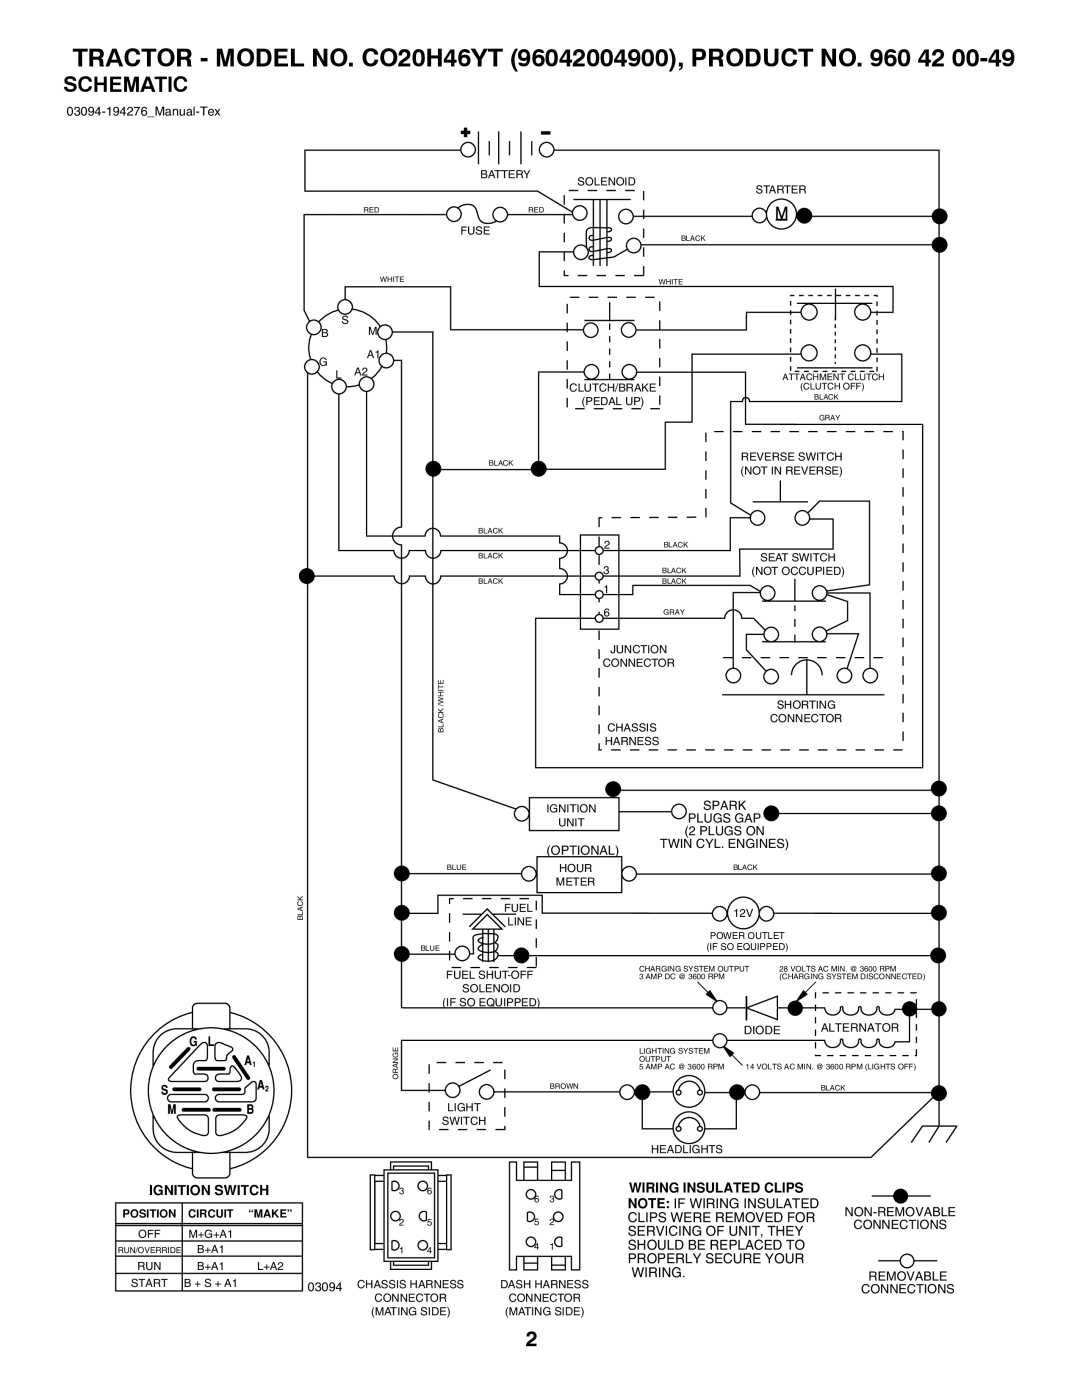 Poulan 412525 manual TRACTOR - MODEL NO. CO20H46YT 96042004900, PRODUCT NO. 960 42, Schematic, Optional, Ignition Switch 